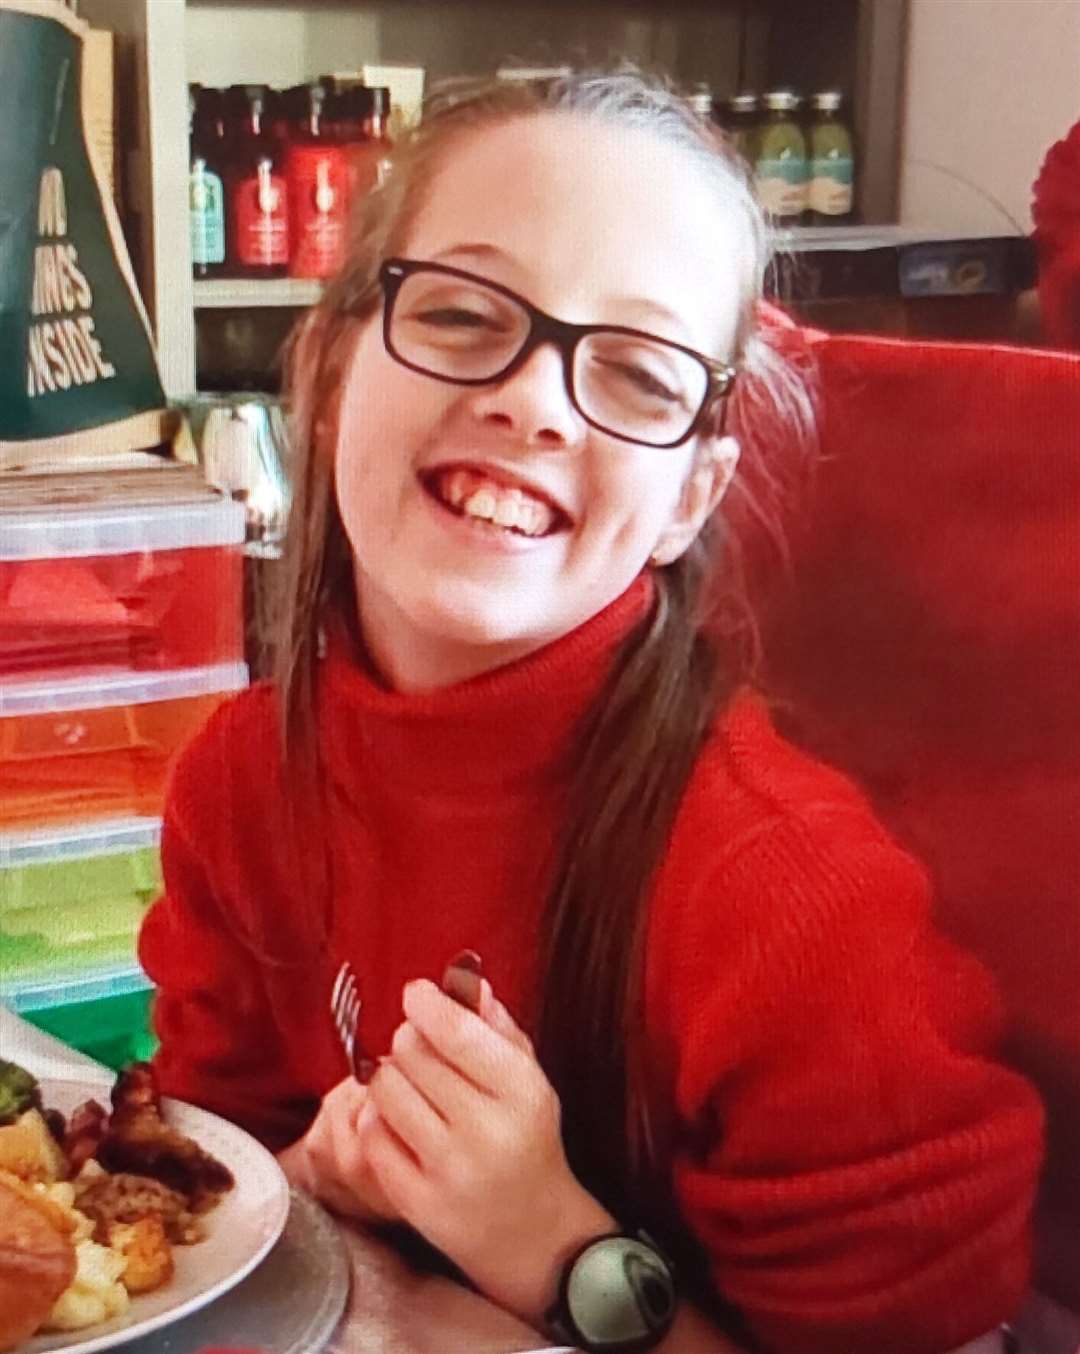 Olivia Sands, 12, was last seen in Barham this morning